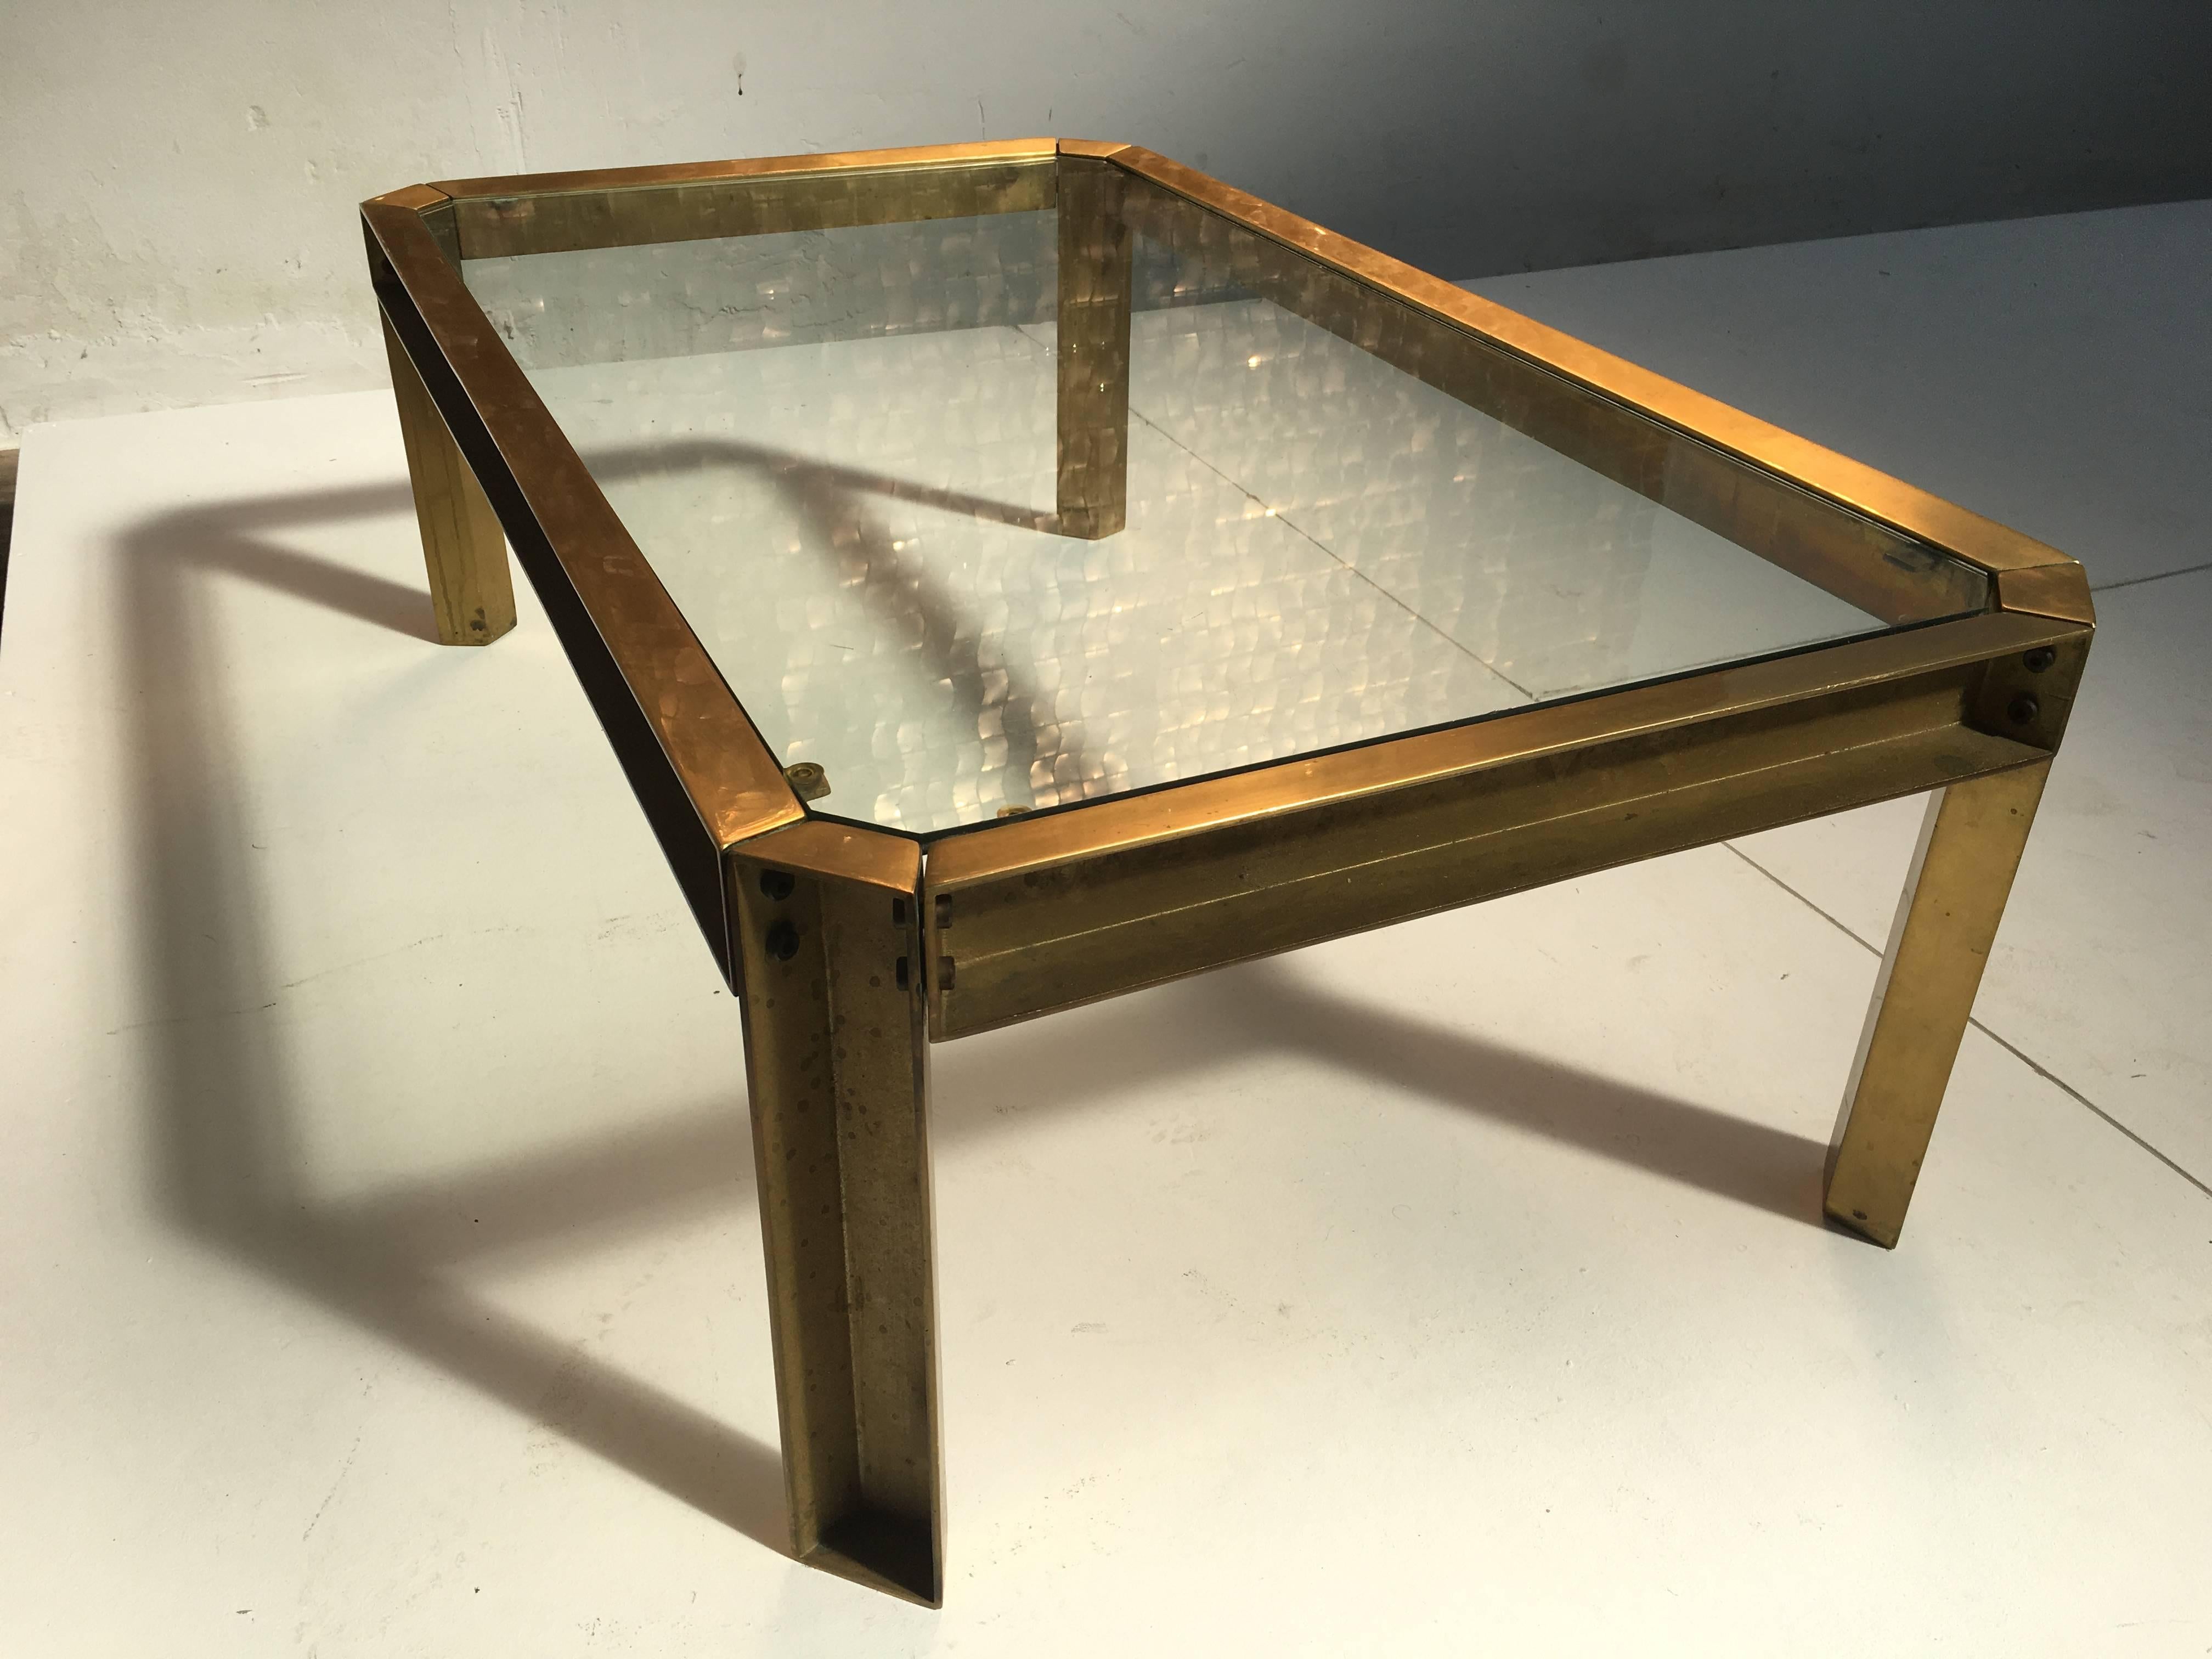 Ghyczy Casted Bronze Coffee Table by Peter Ghyczy, 1970s For Sale 2